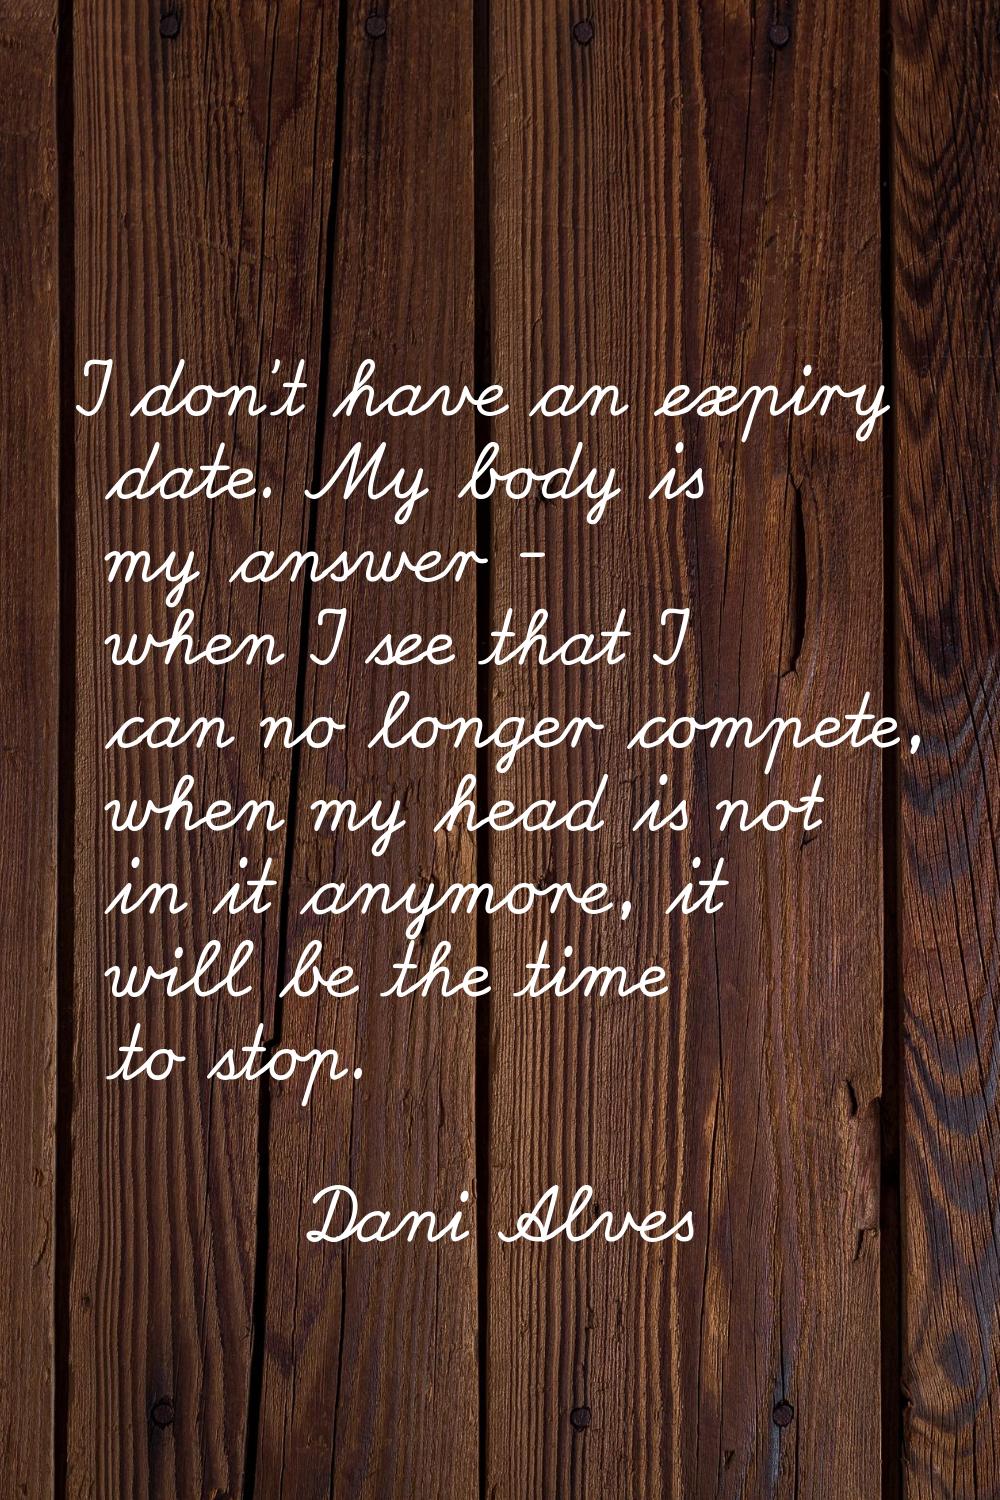 I don't have an expiry date. My body is my answer - when I see that I can no longer compete, when m